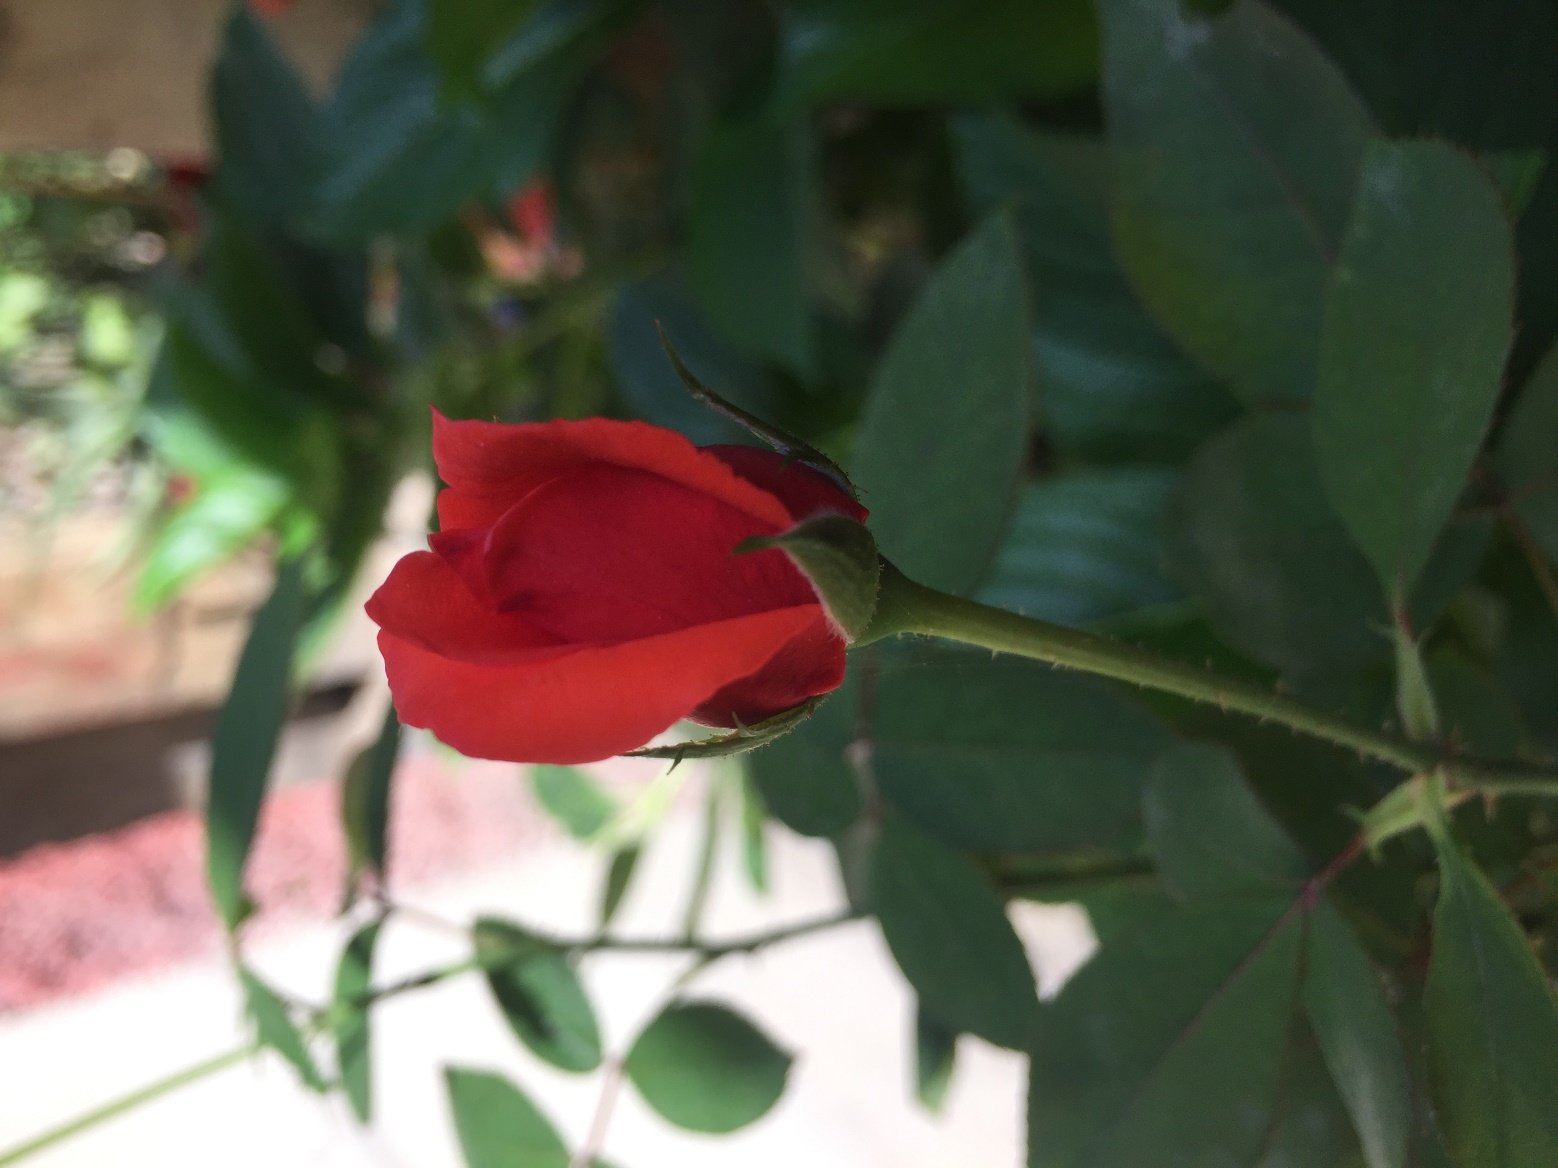 A red flower on a plant

Description automatically generated